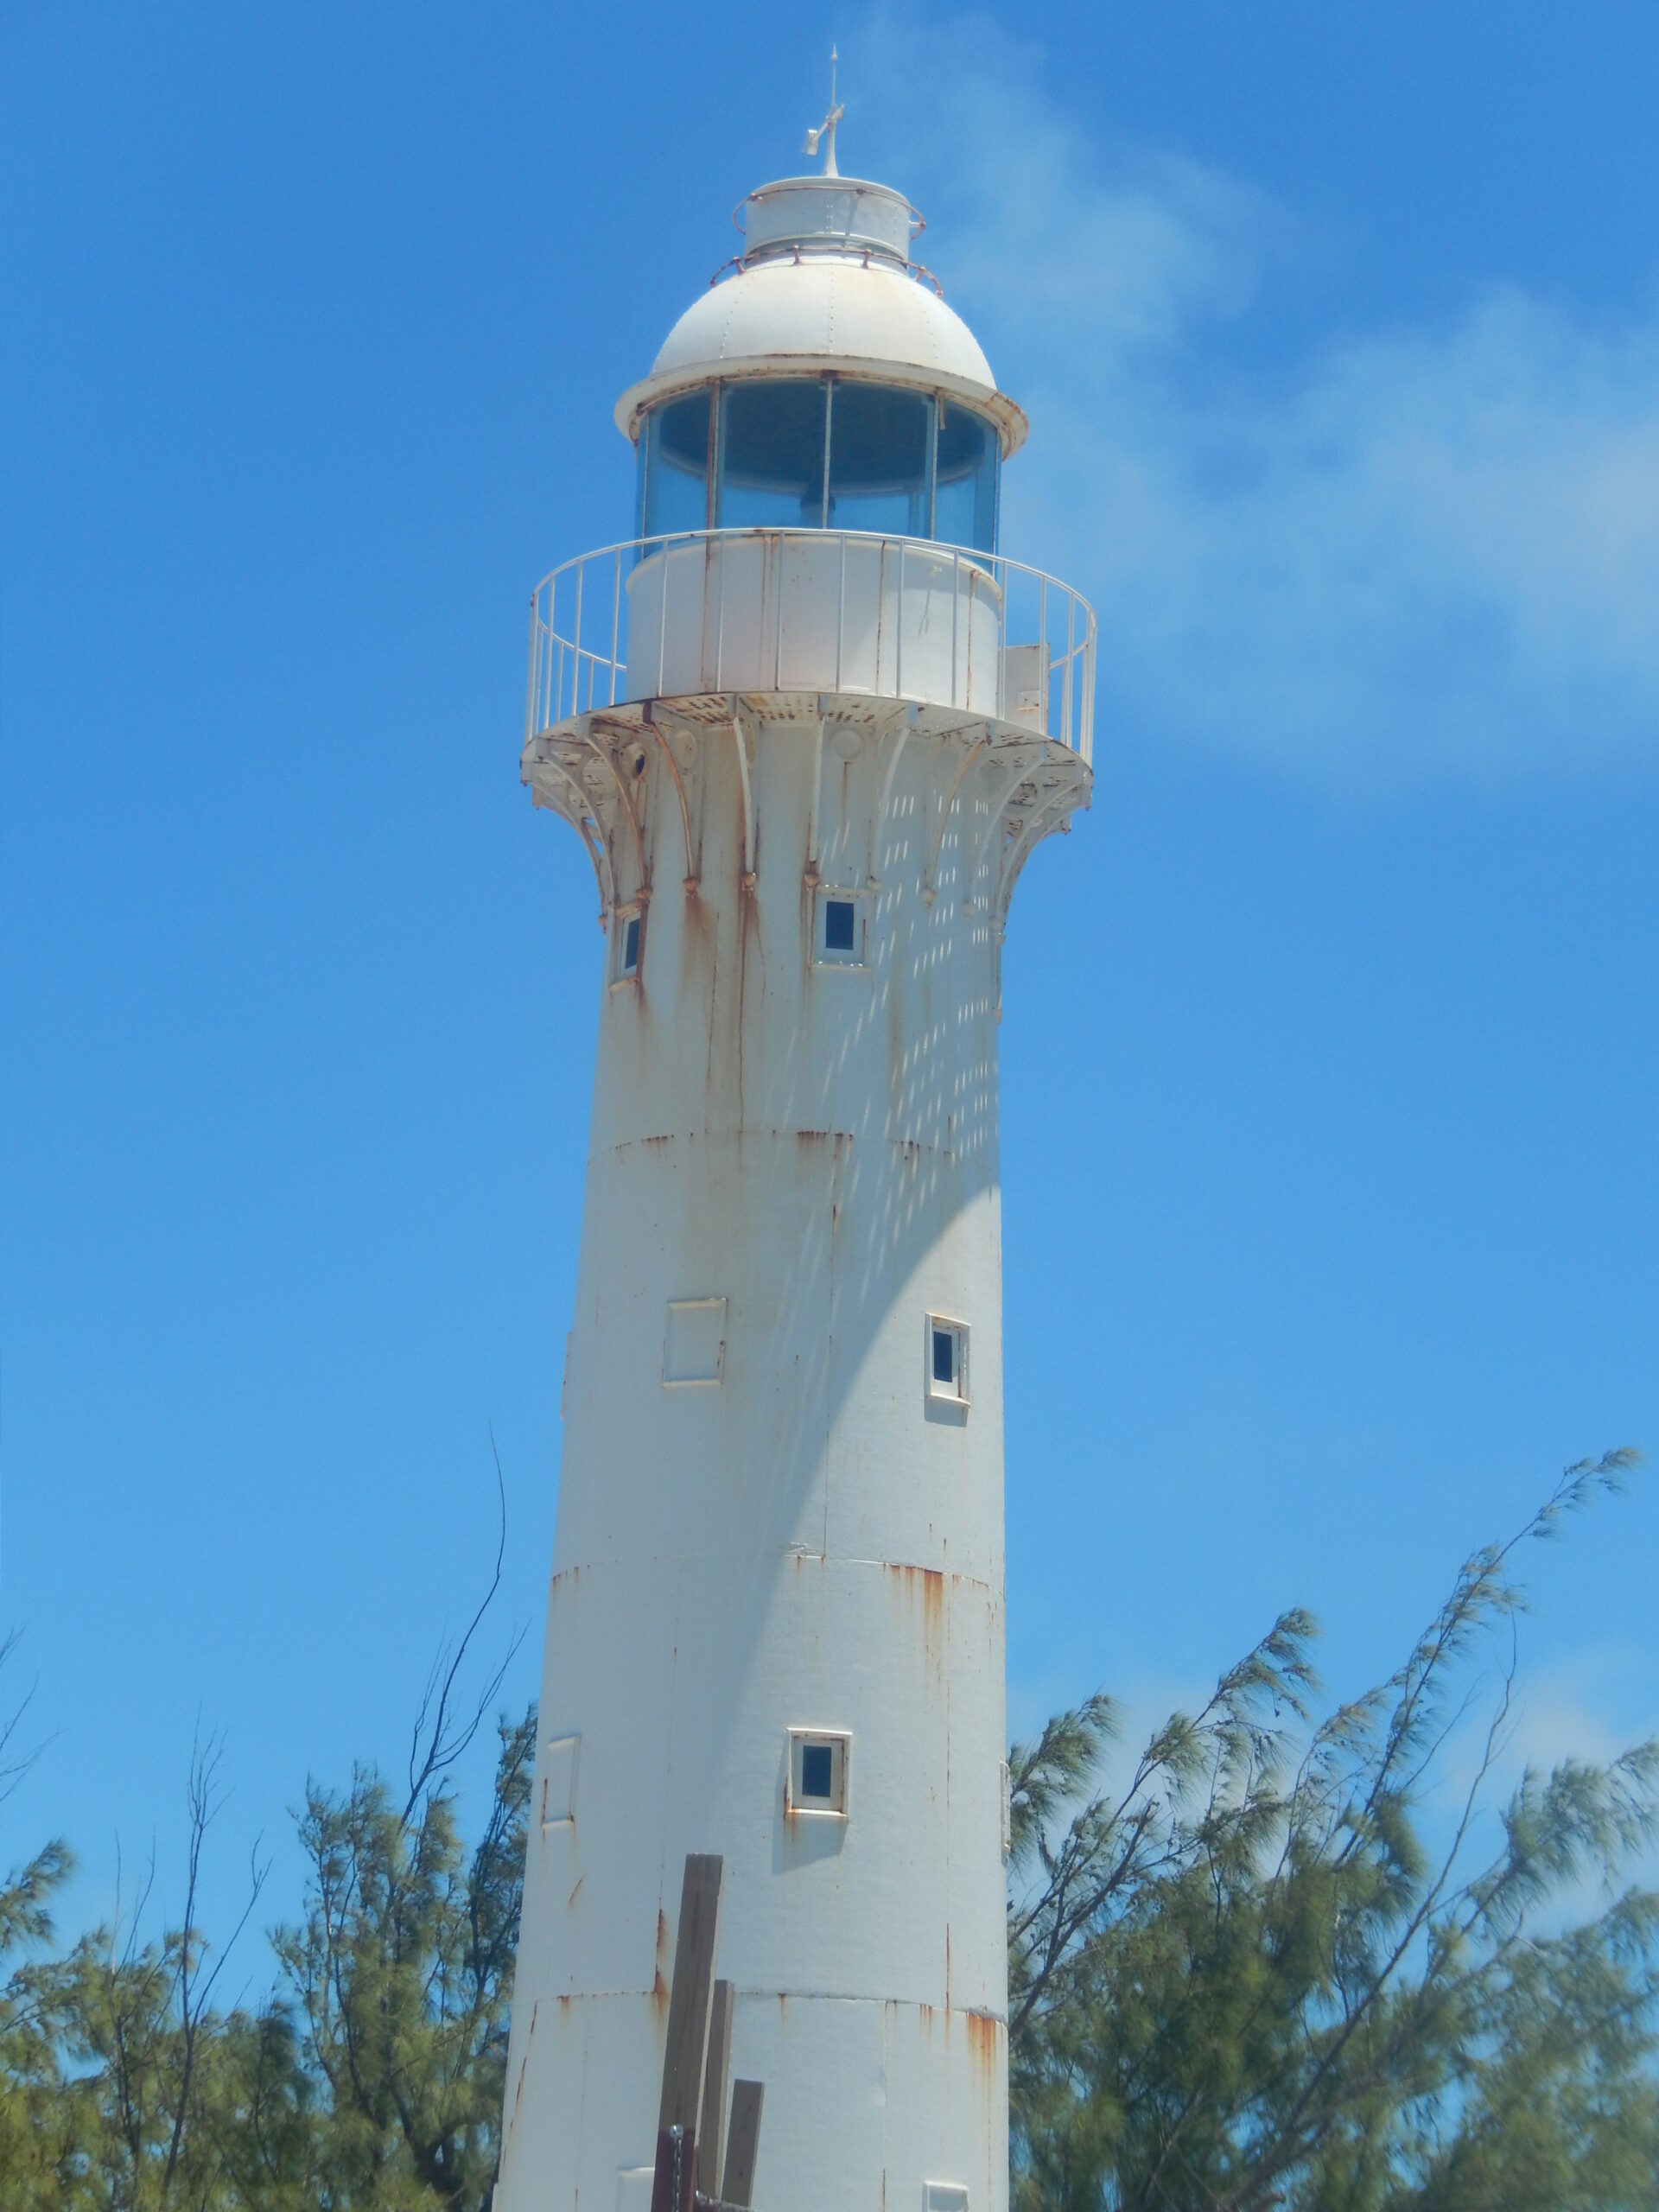 Built in London and shipped to Grand Turk in 1852, The Grand Turk Lighthouse